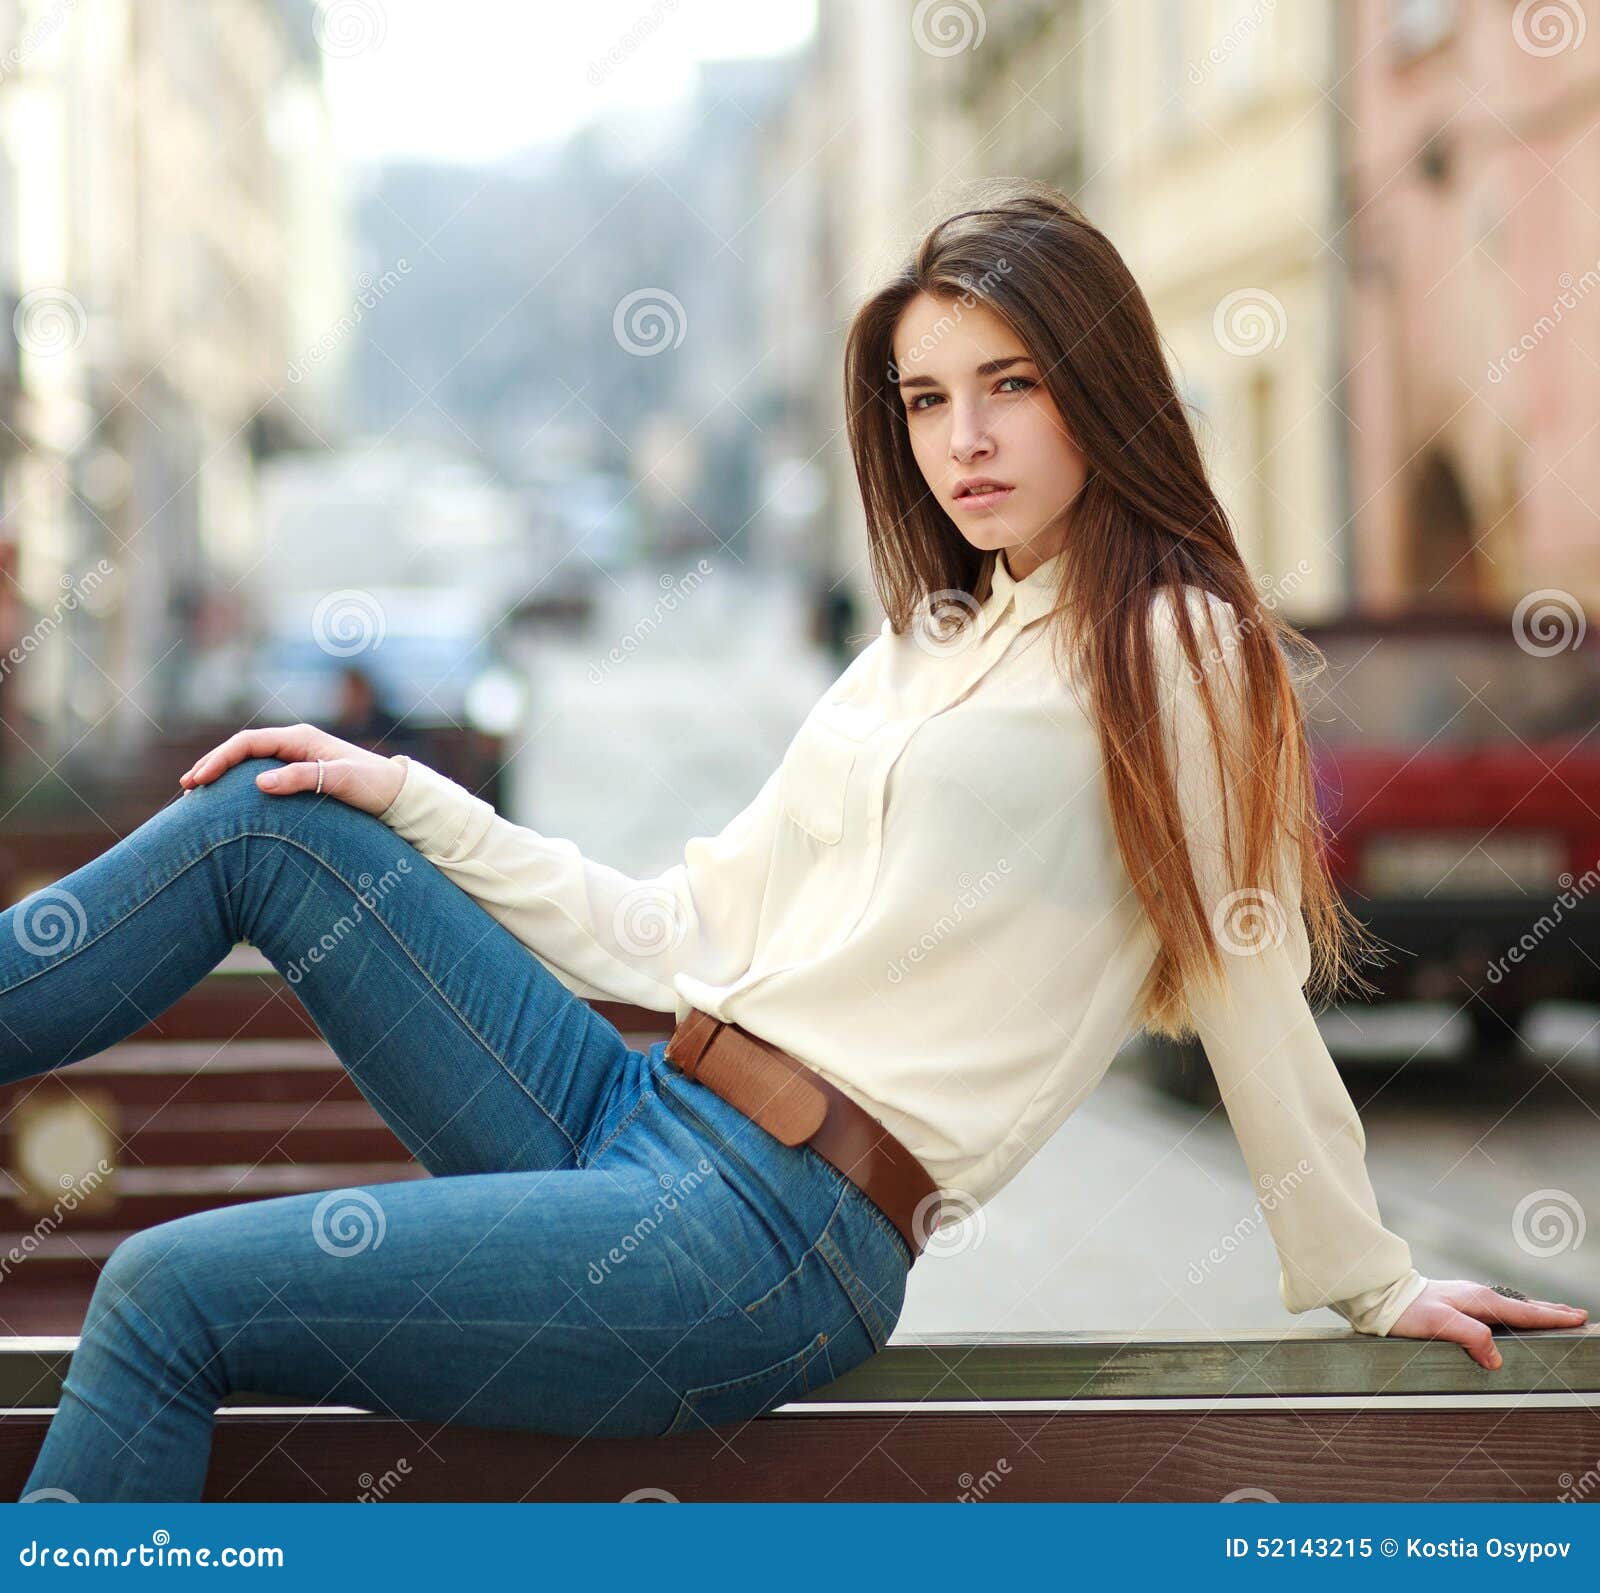 Stylish Young Girl Red Hair Posing Stock Photo 283609481 | Shutterstock